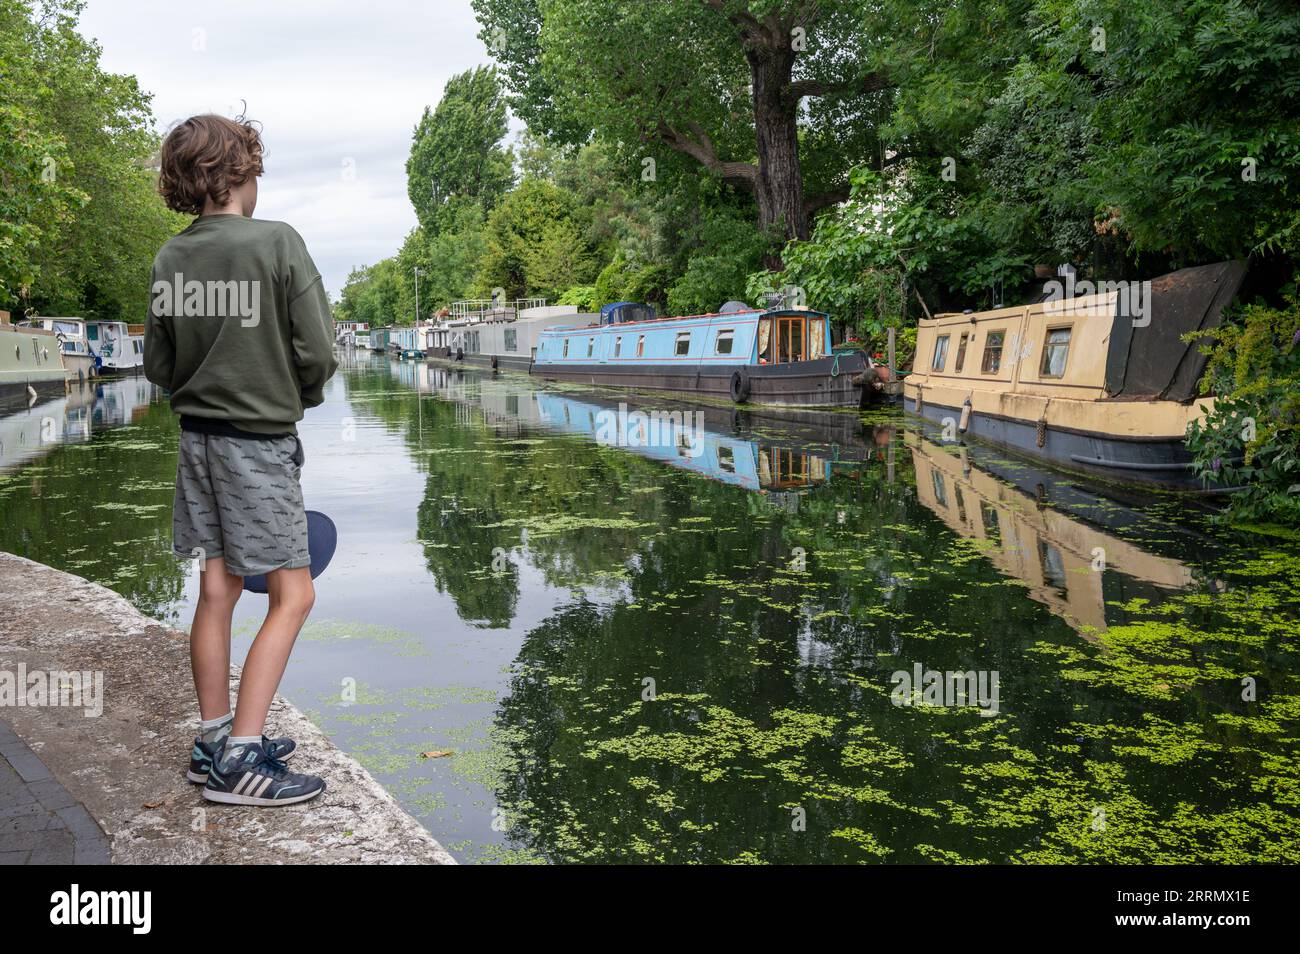 Boy looking at canal boats in Little Venice, London Stock Photo